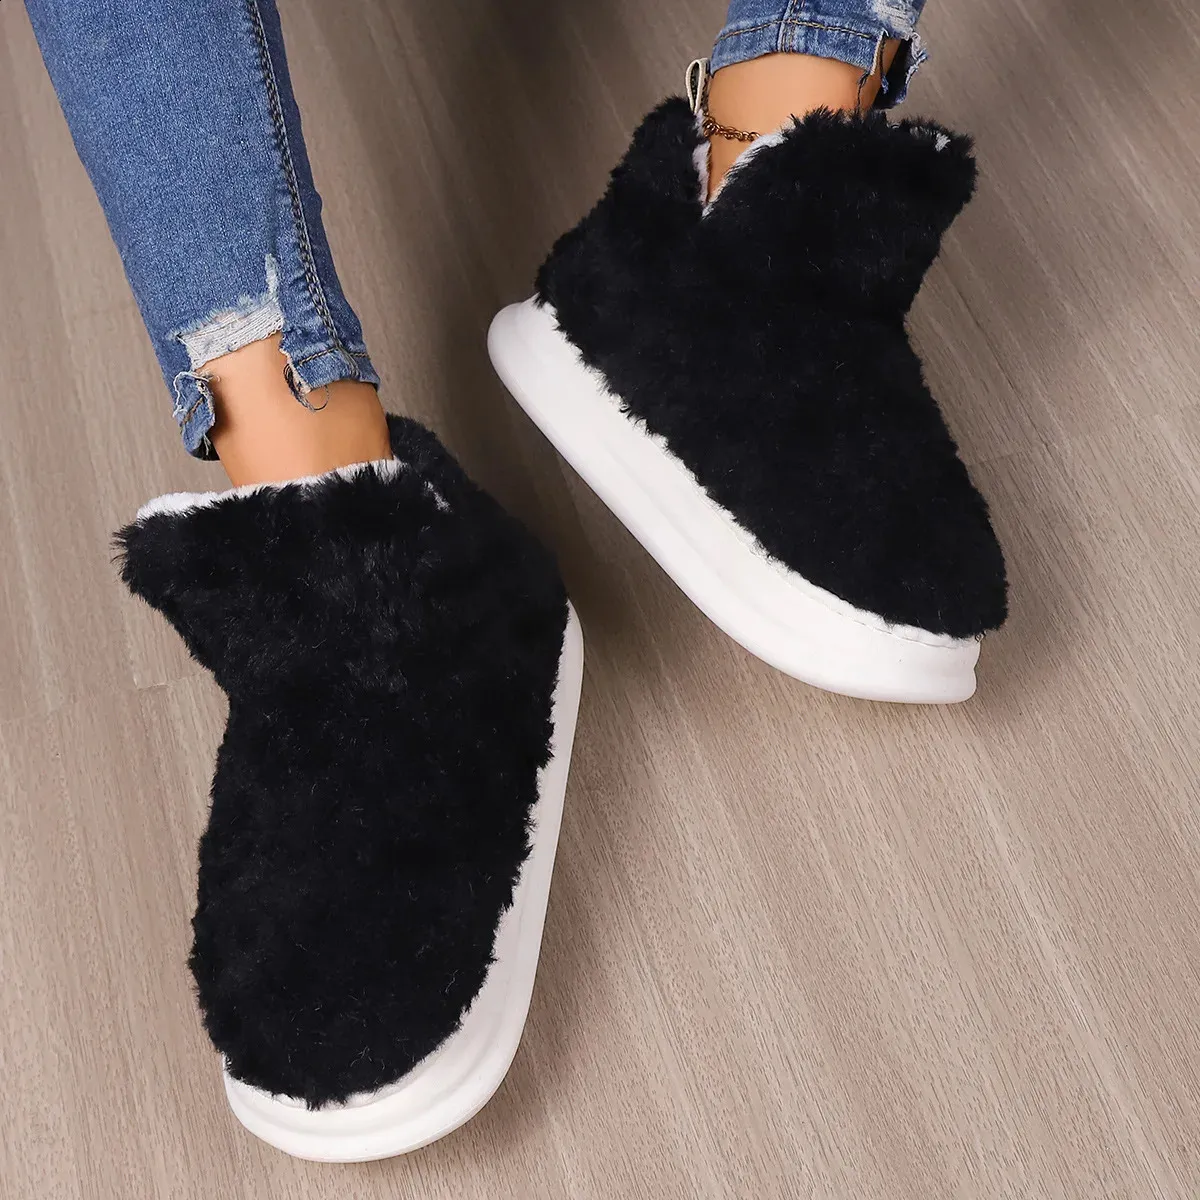 Slippers Women Warm Fur Slippers Couples Winter Platform Shoes Soft Plush Thick Sole Girls Boys Indoor Street Snow Boots Fluffy Footwear 231109